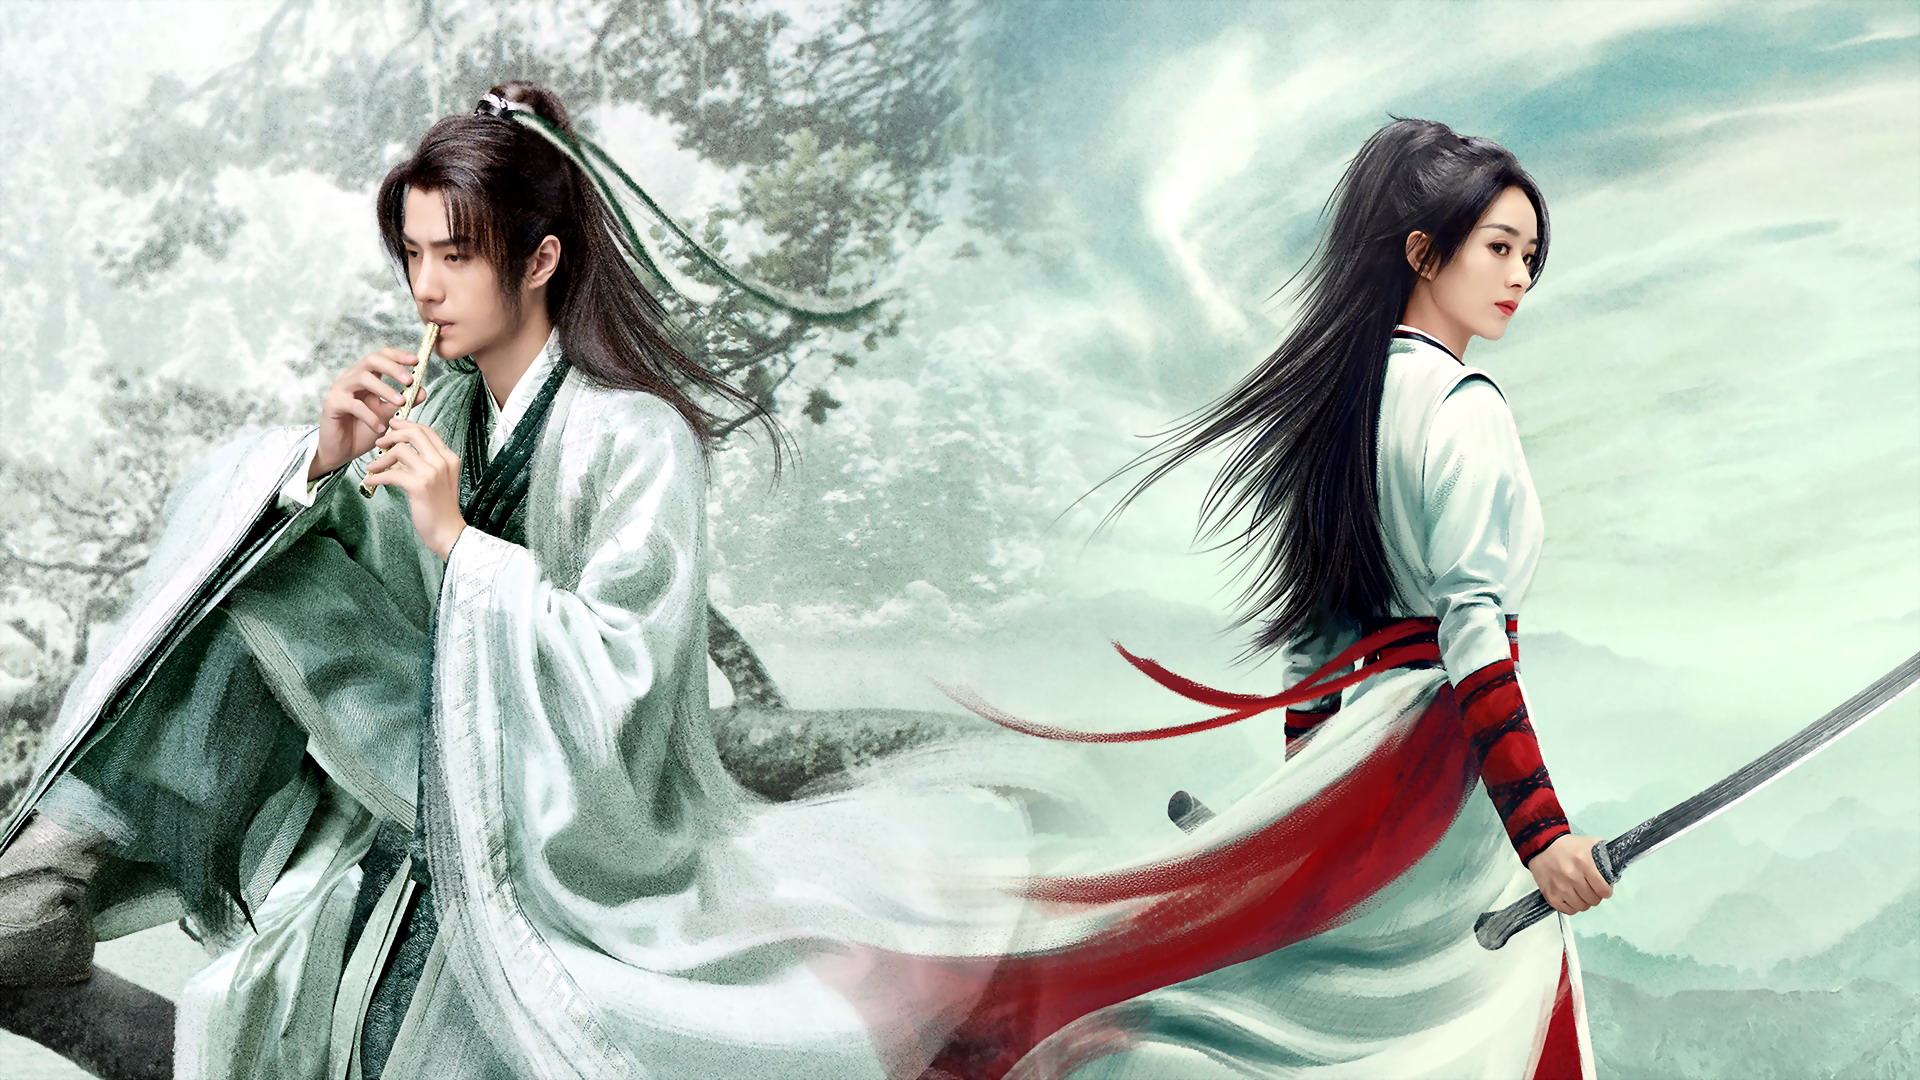 TV Show Legend of Fei HD Wallpaper | Background Image